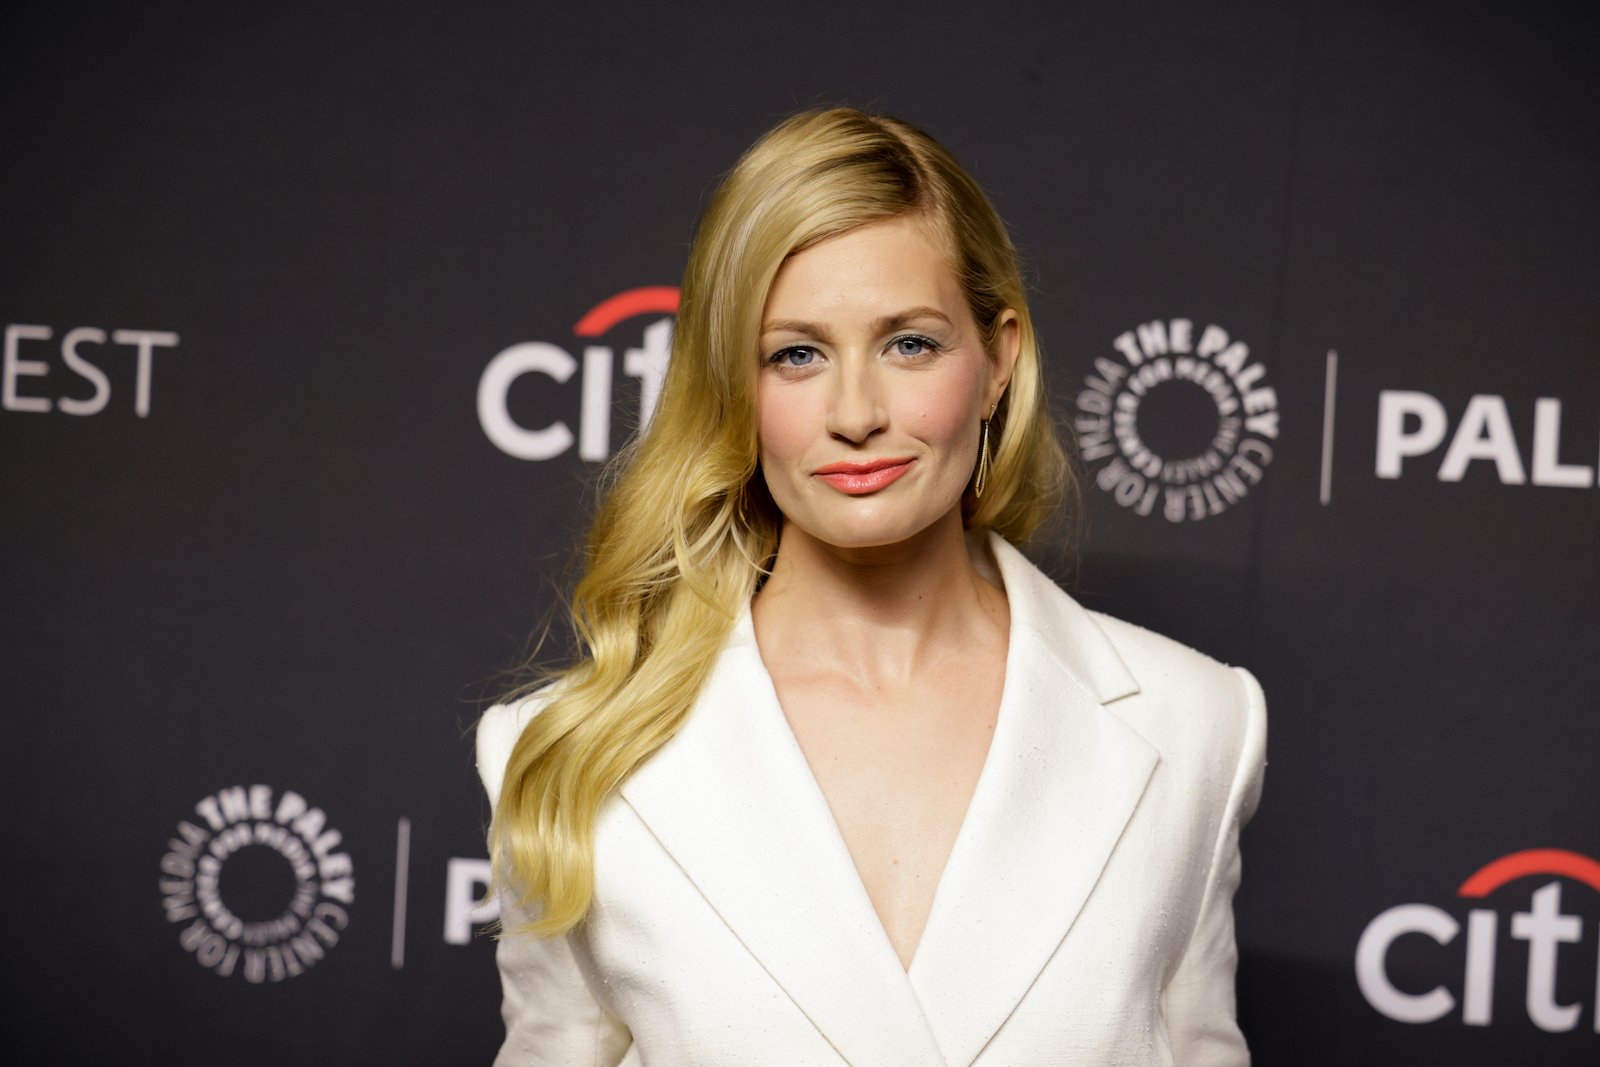 Beth Behrs from 'The Neighborhood' poses for a photo at an event. 